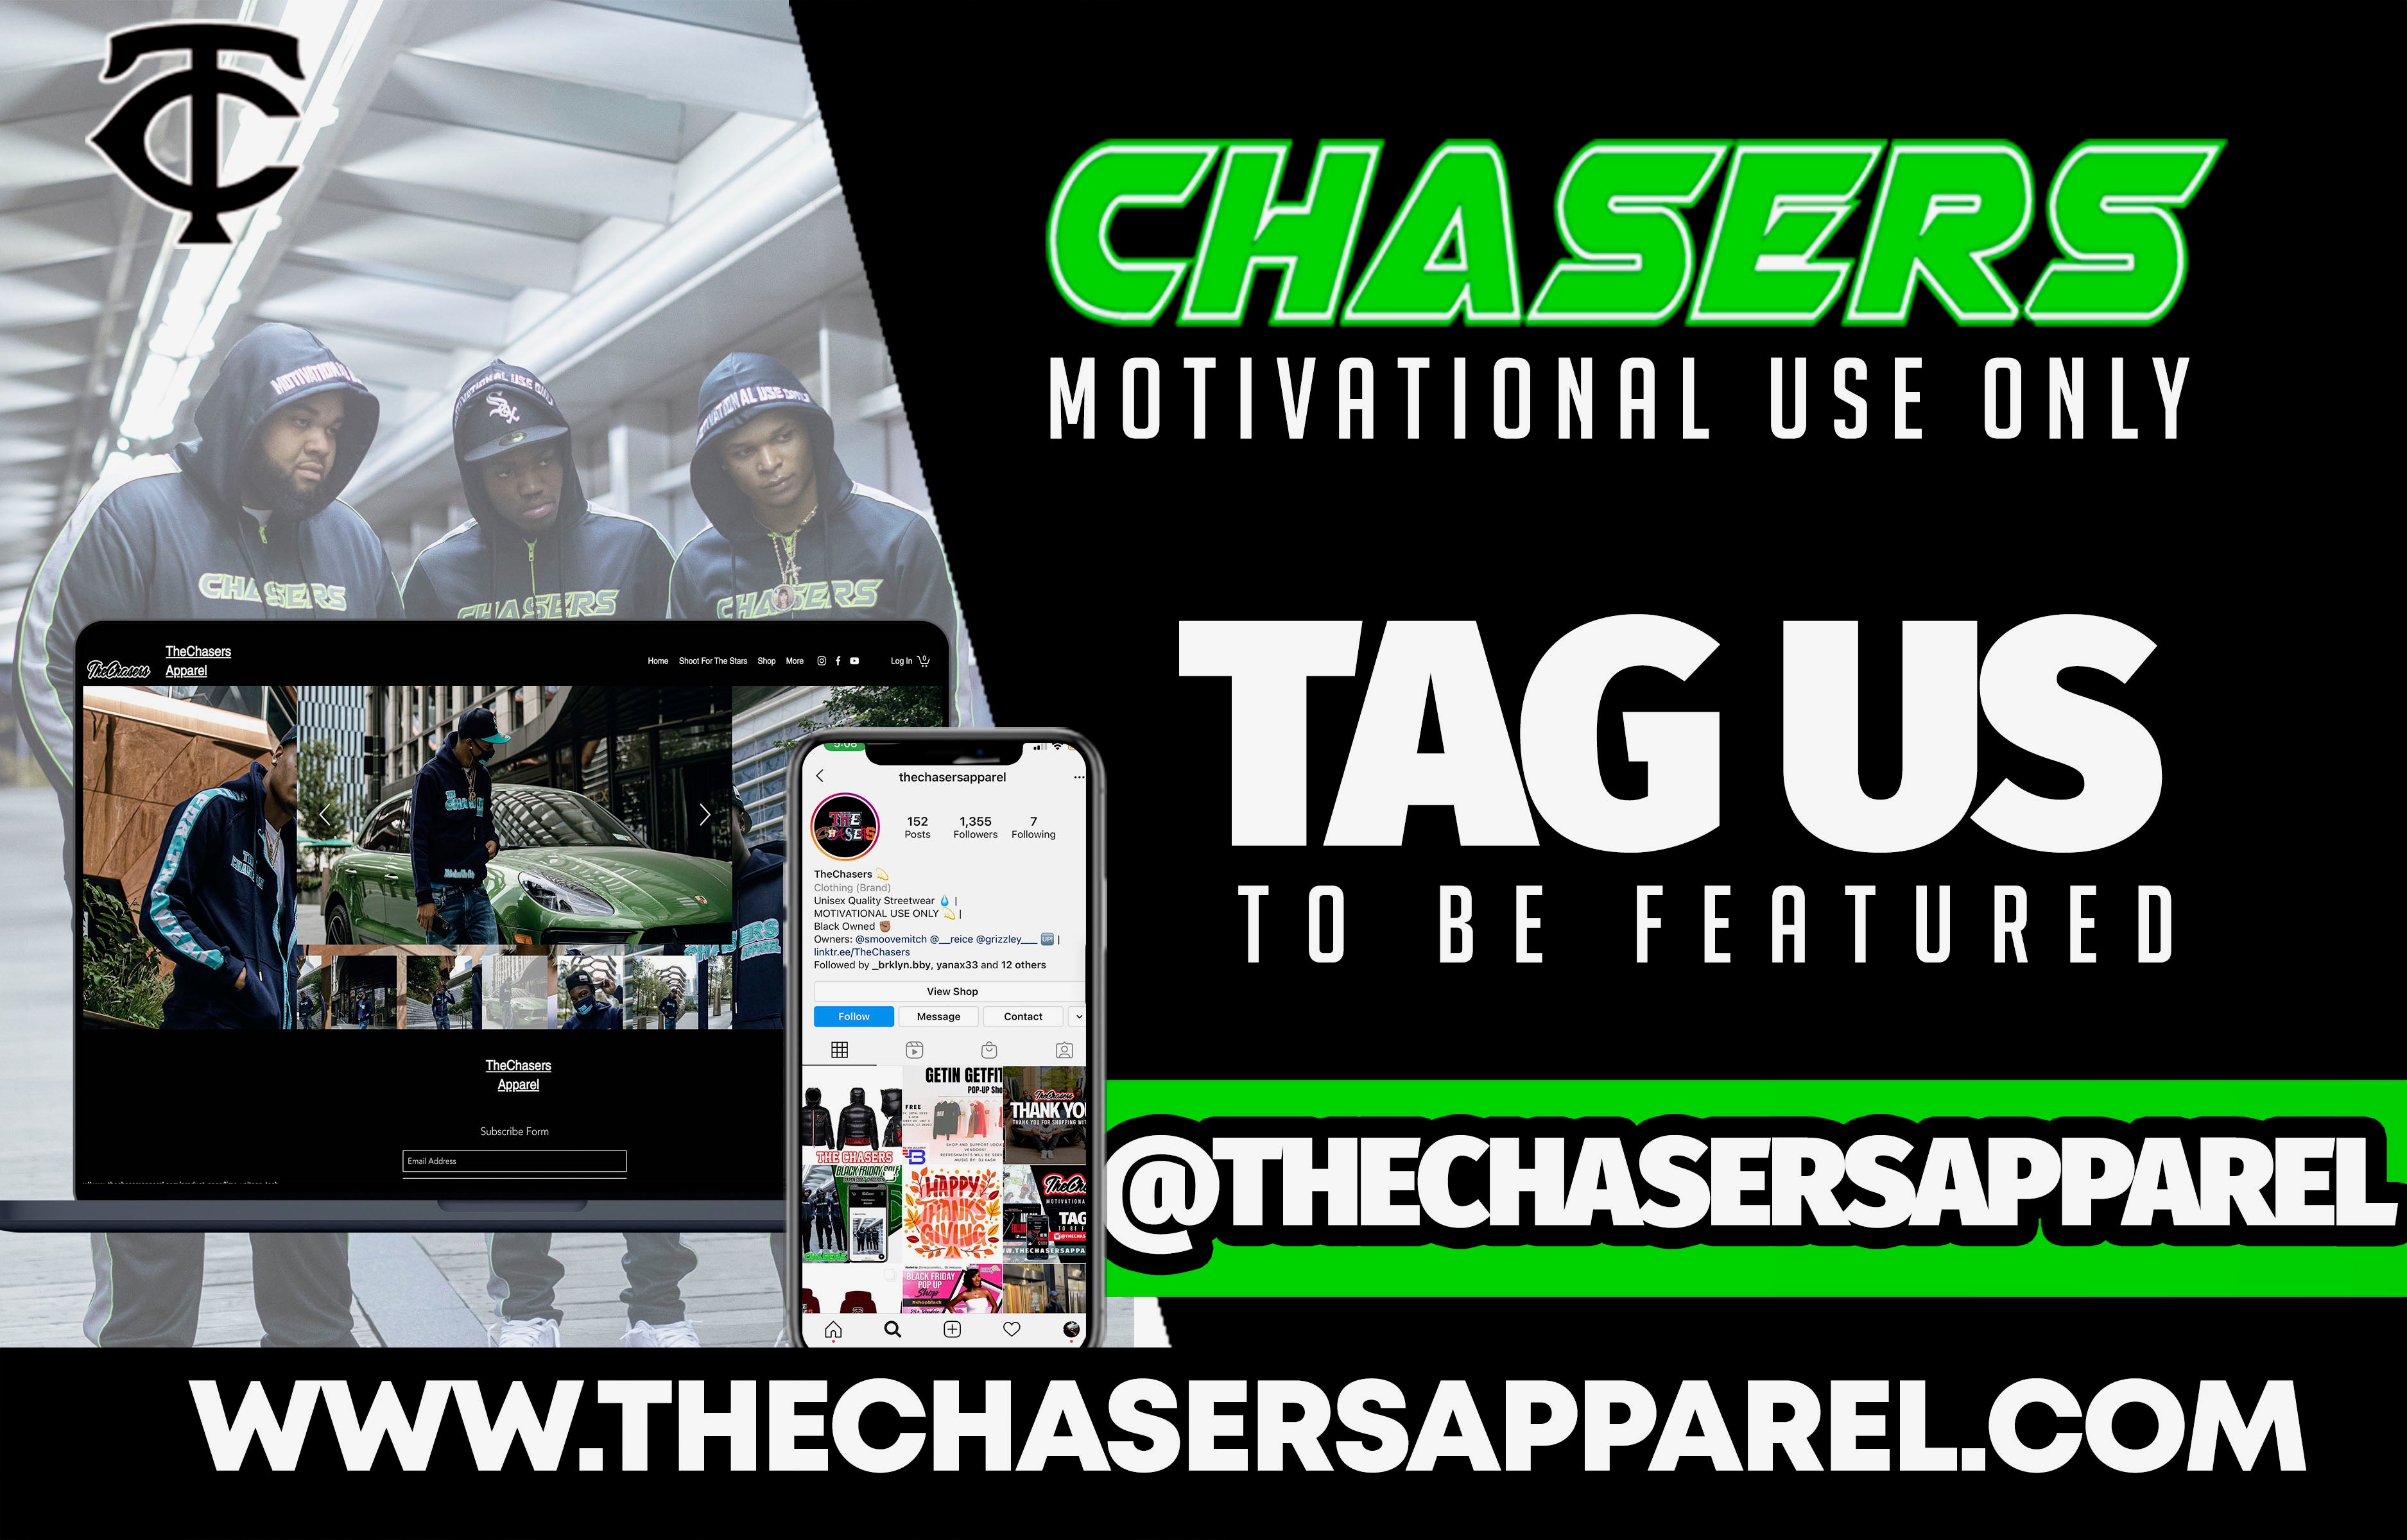 TheChasers Apparel